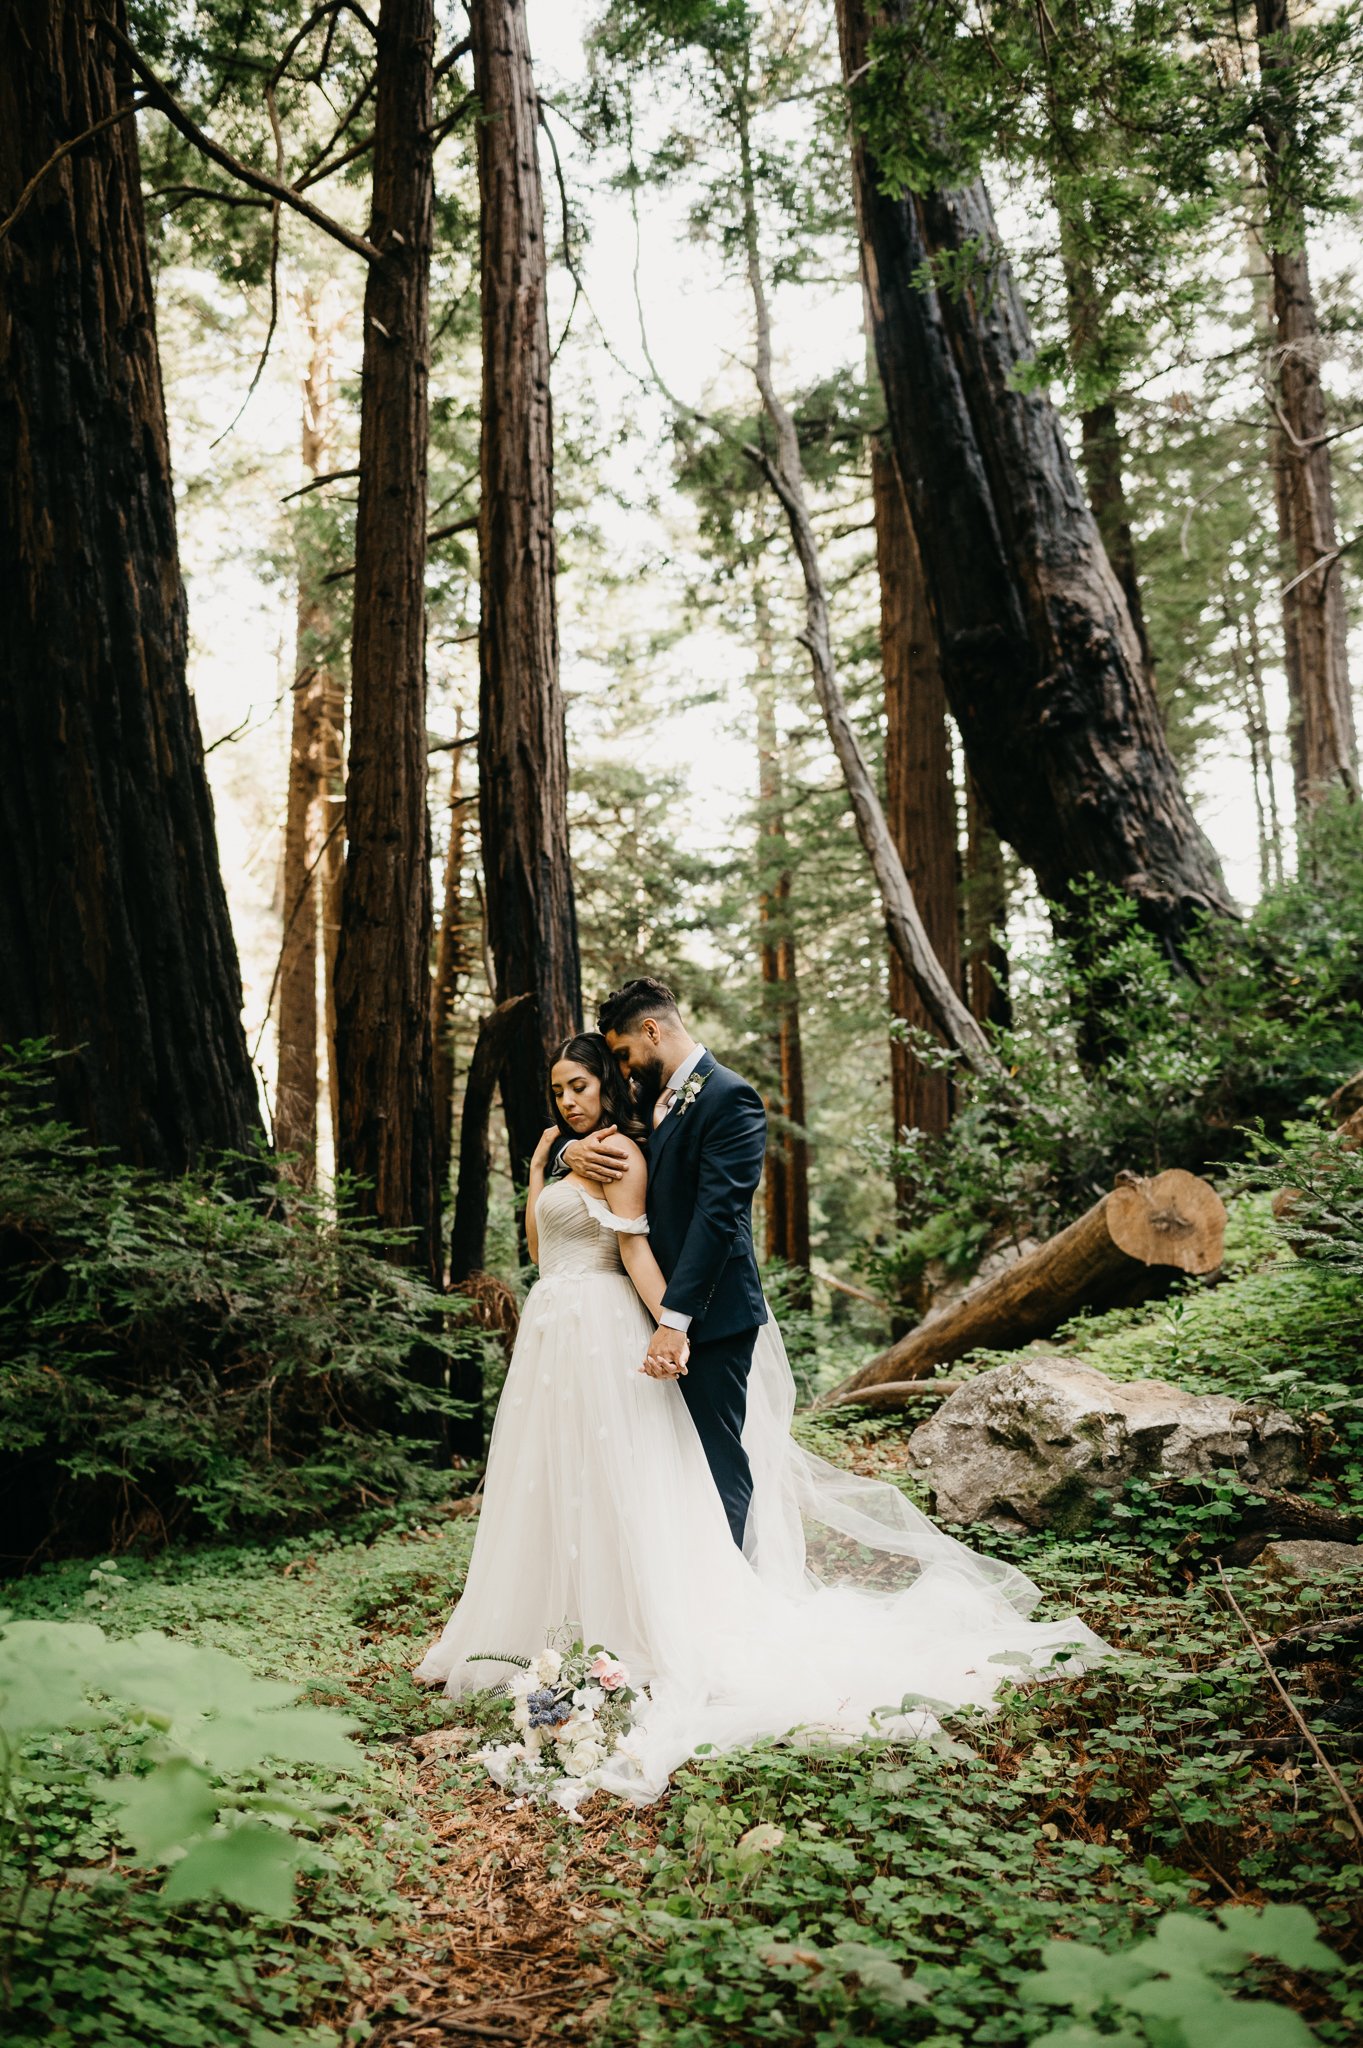 bride and groom in wedding dress and suit in Big Sur Forest large redwoods in background